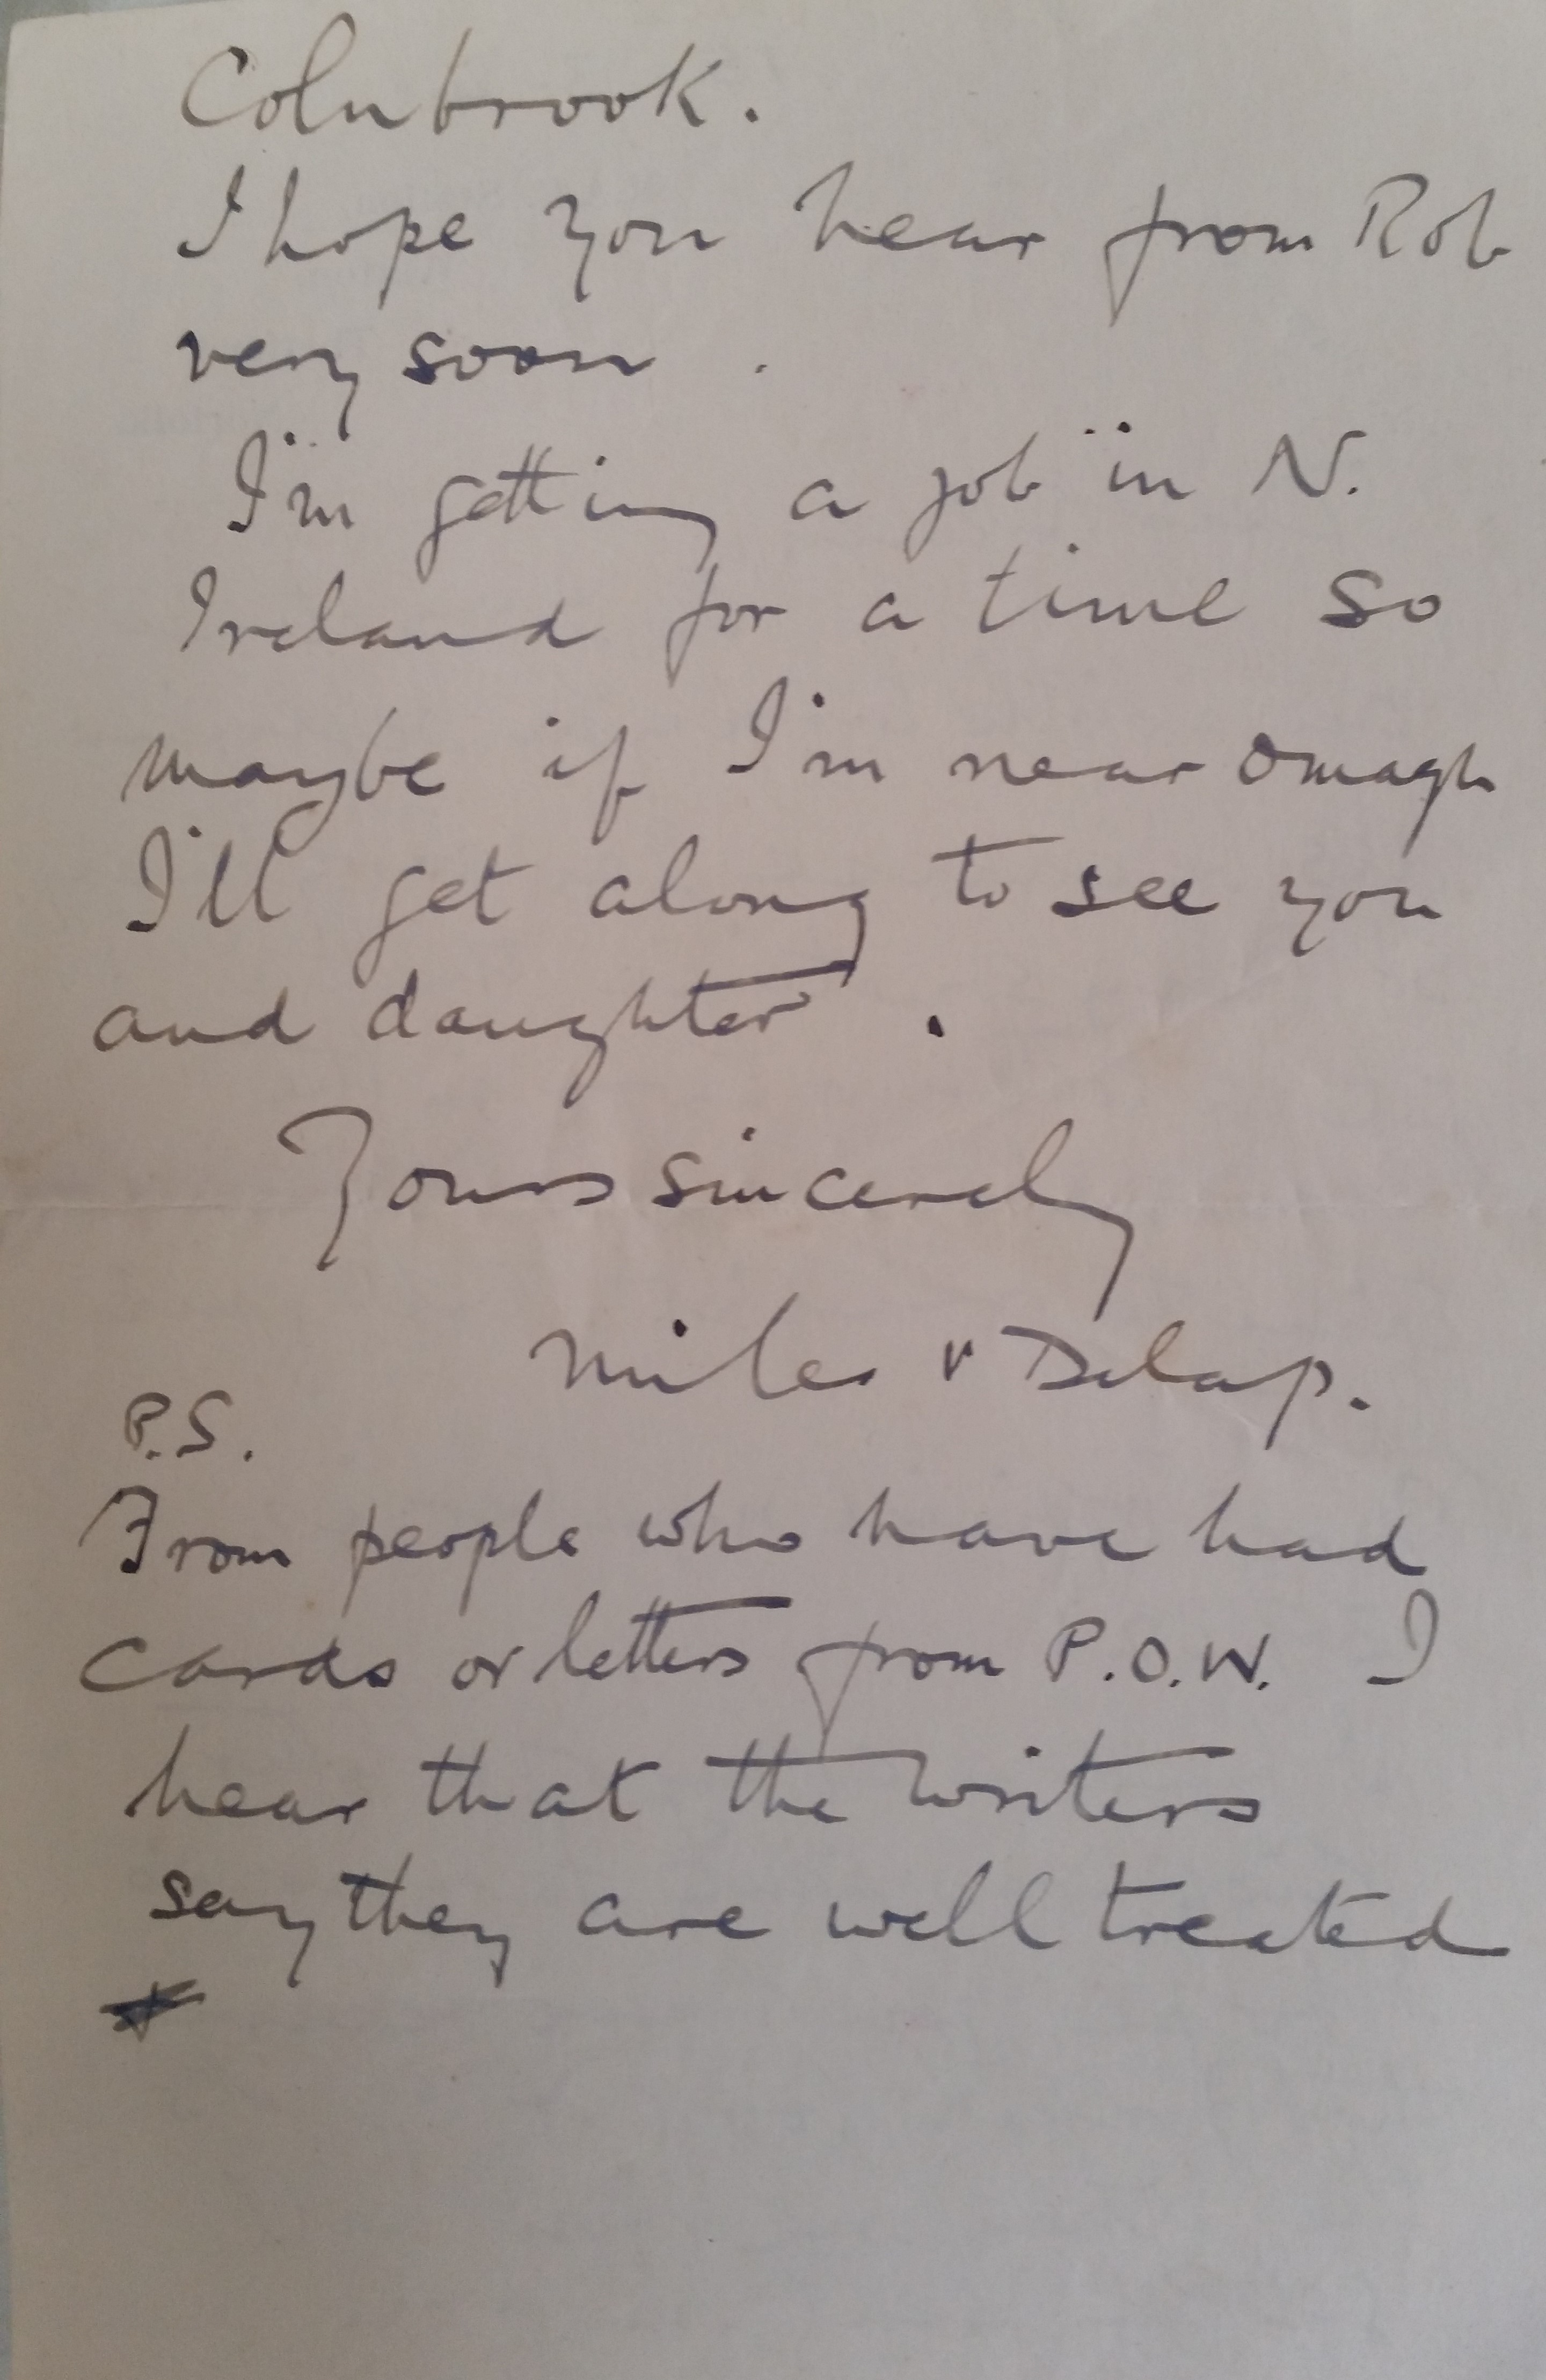 15th-march-1941-letter-delap-to-kathleen-2of2